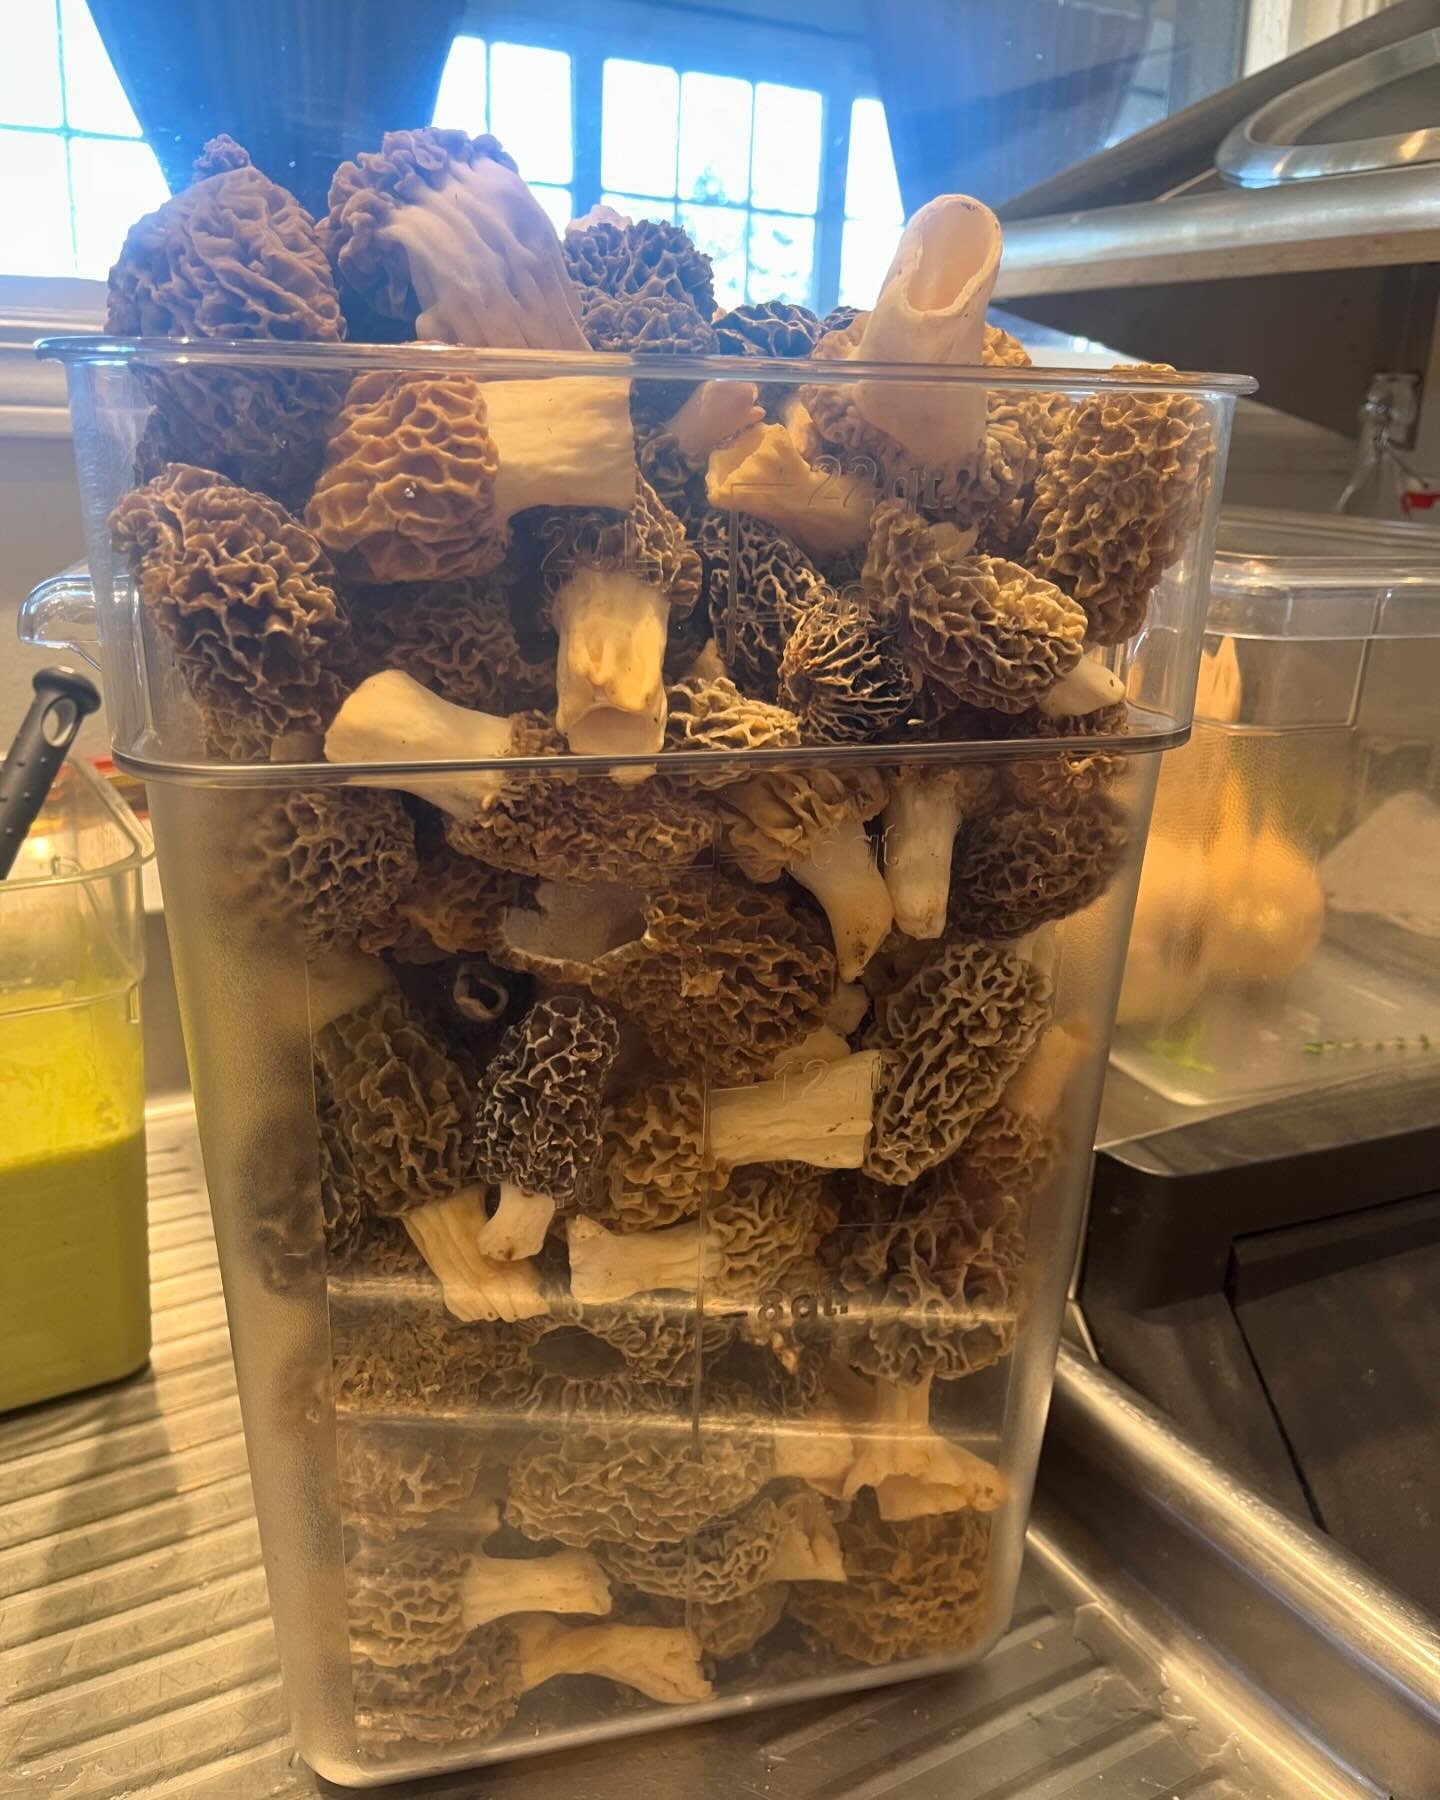 🍄🍄 Nothing makes us more excited than hyper local ingredients like these Morel beauties! This Springtime phenomenon is available for picking for a very short window of time here in the Carolinas! We&rsquo;re lightly saut&eacute;ing them in some but